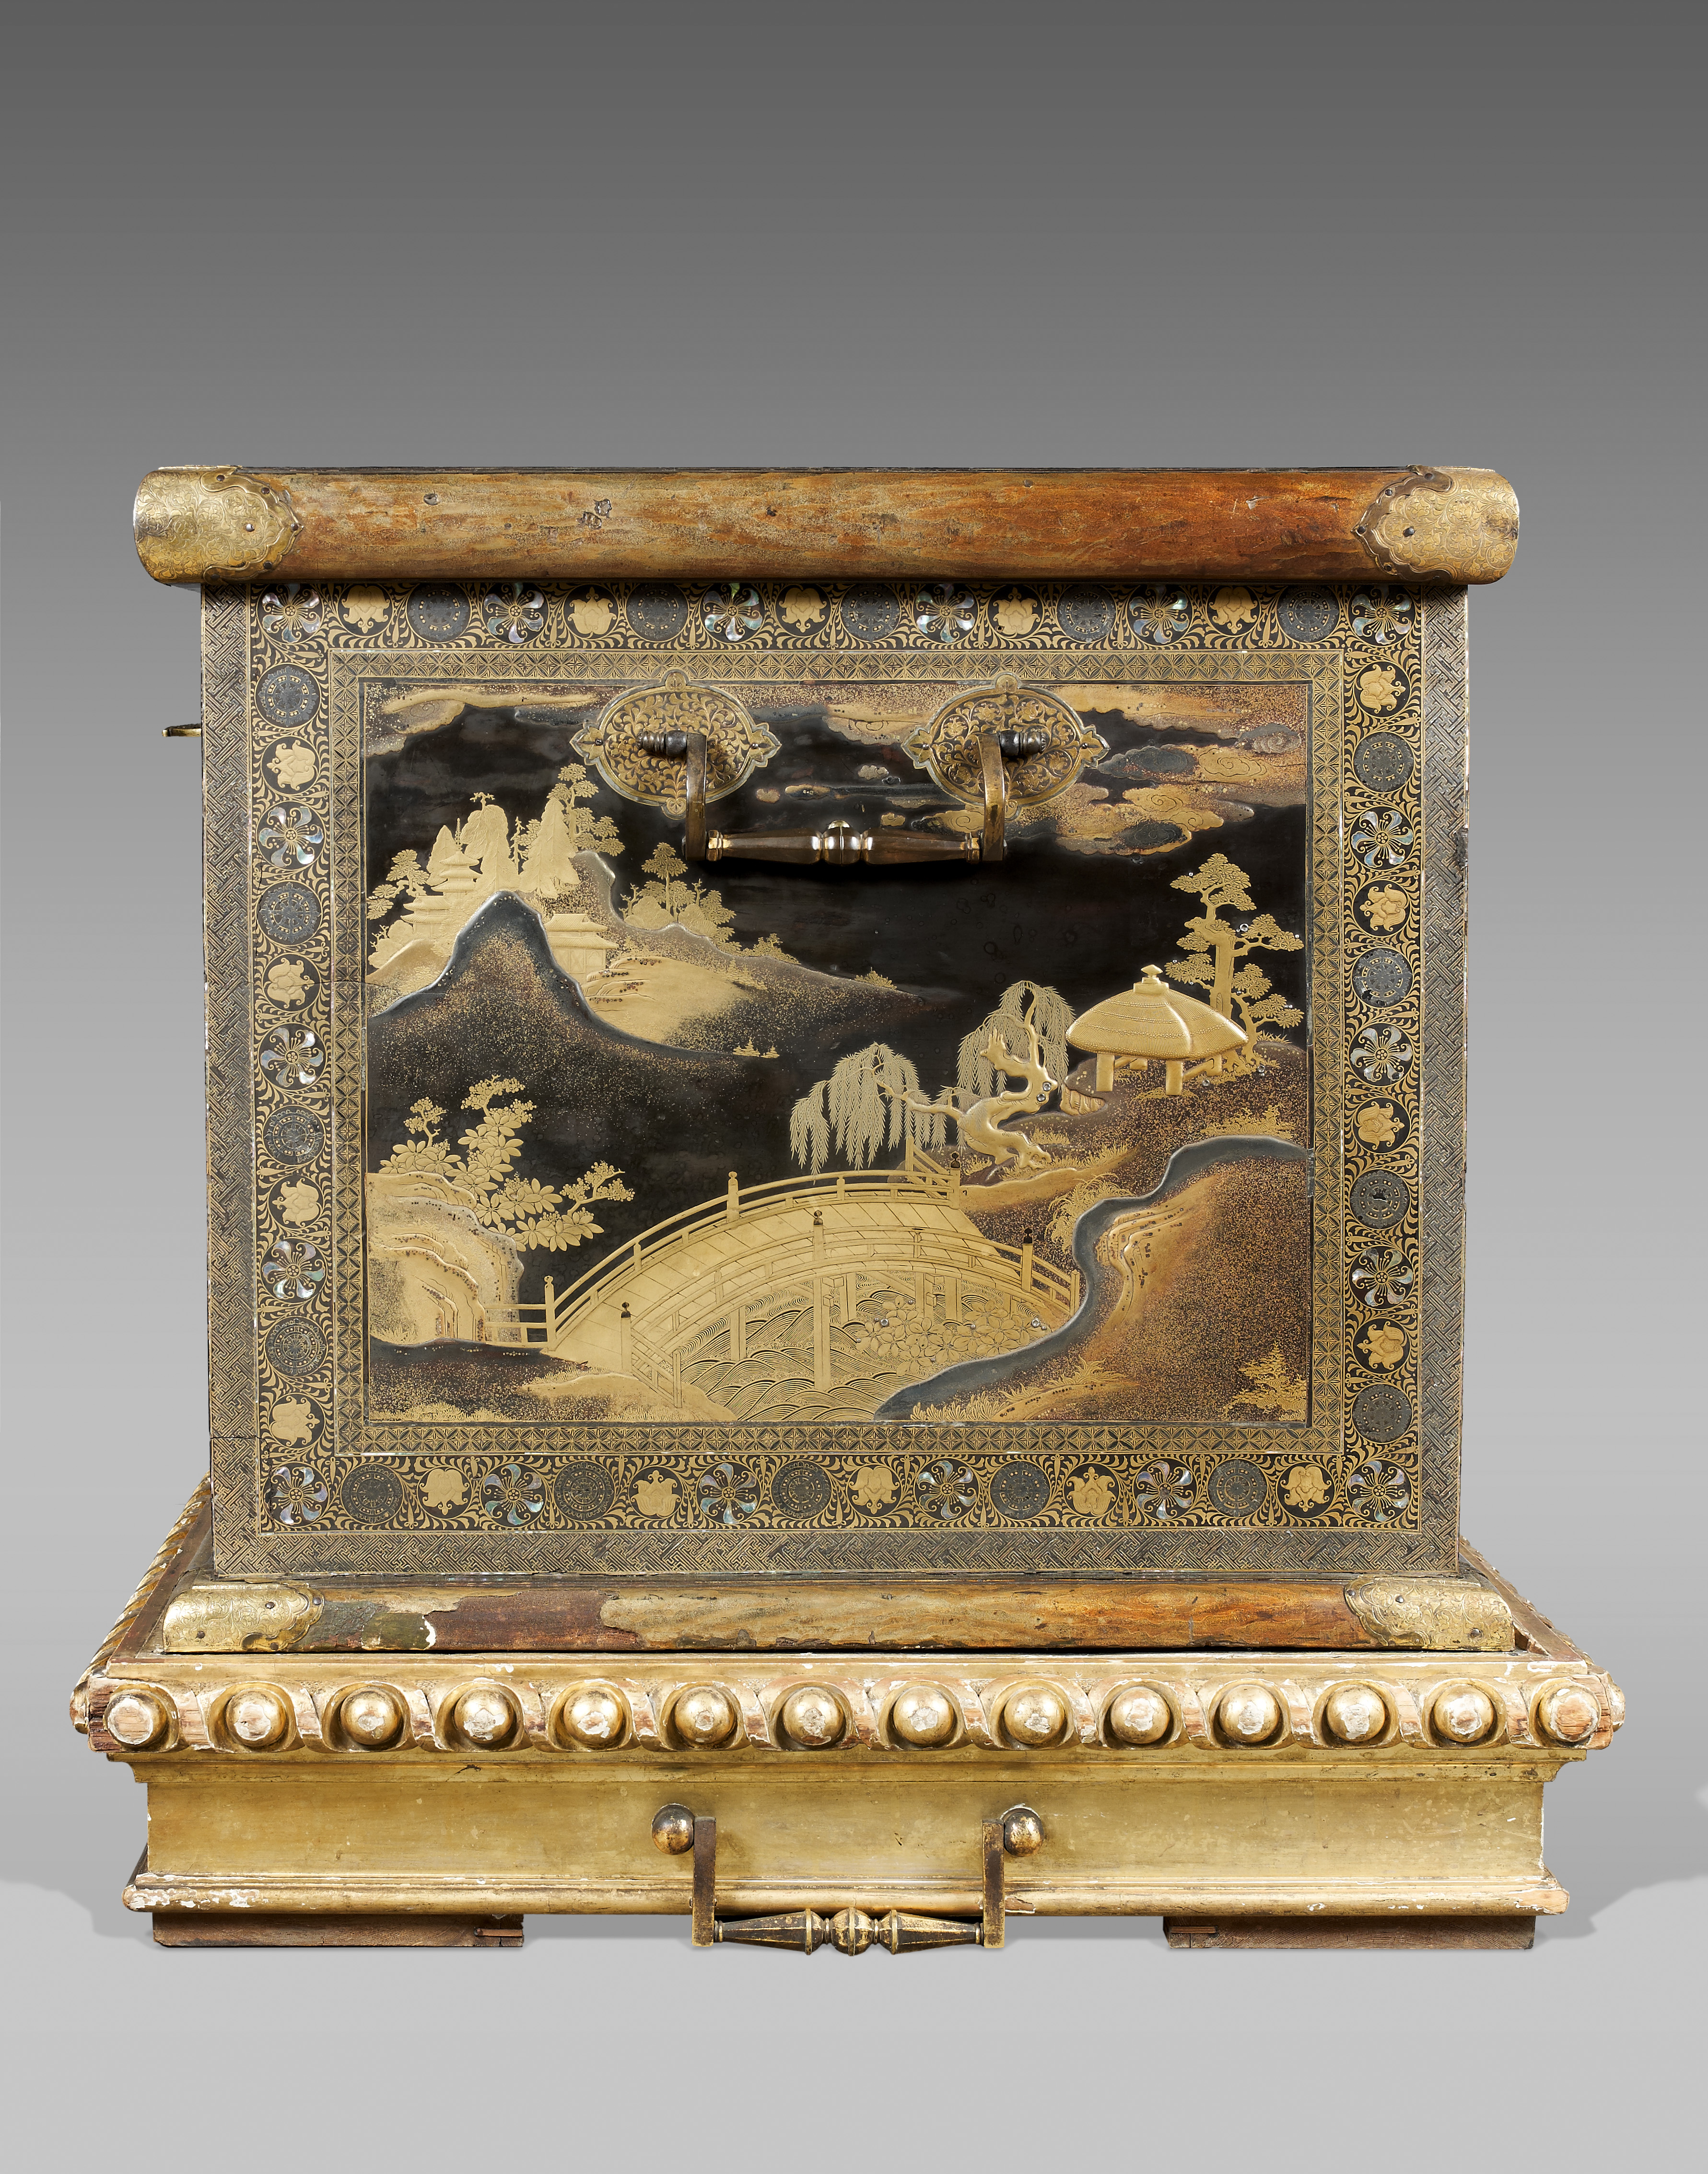 Mazarin's lost golden chest was being used as a bar – The History Blog